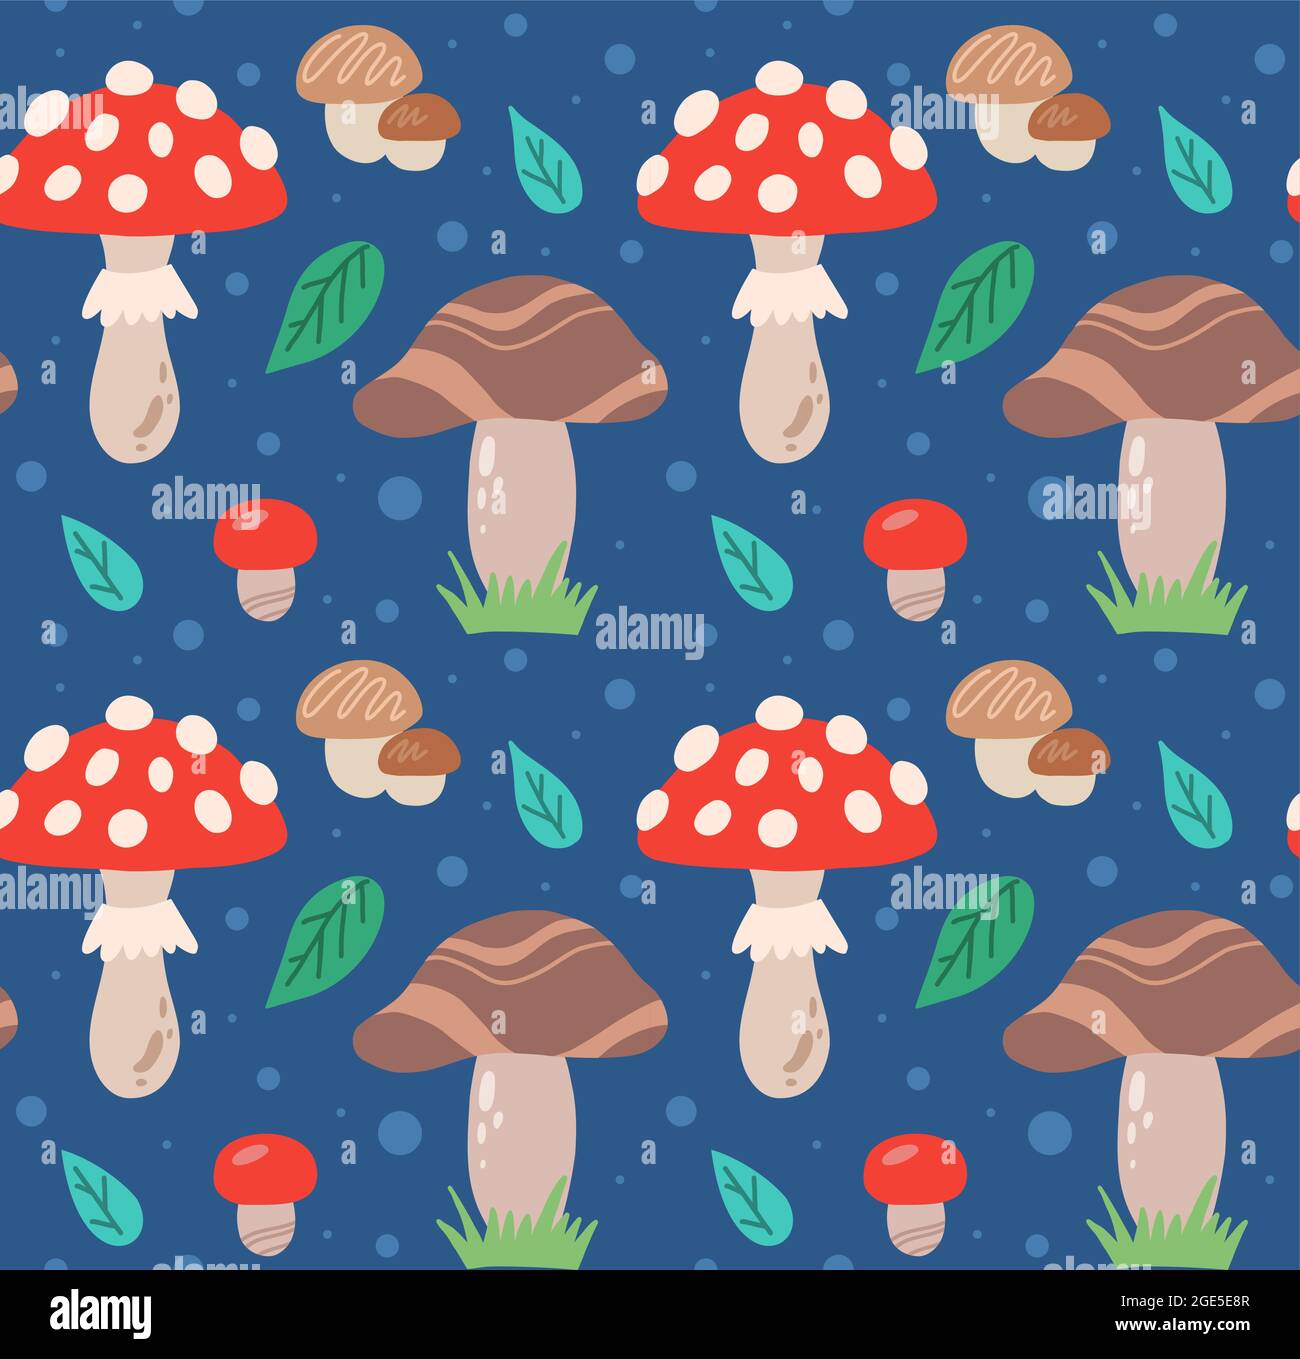 Seamless childrens pattern with mushrooms, amanitas, foliage and polka dots on blue background. Vector natural texture with fungus and leaves. Wallpap Stock Vector